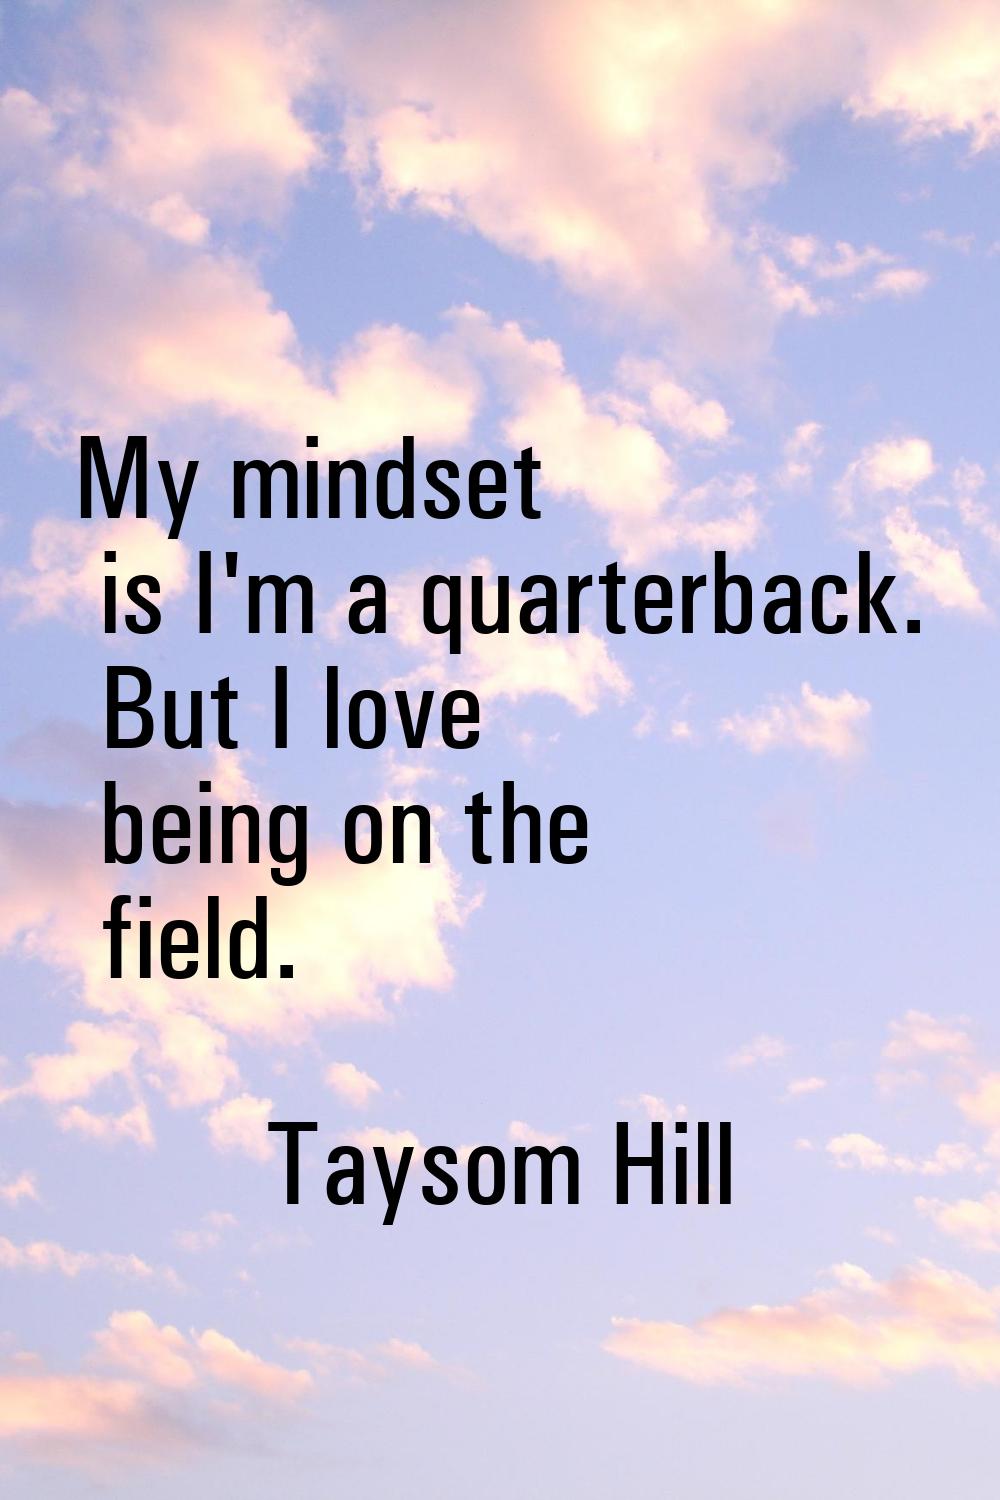 My mindset is I'm a quarterback. But I love being on the field.